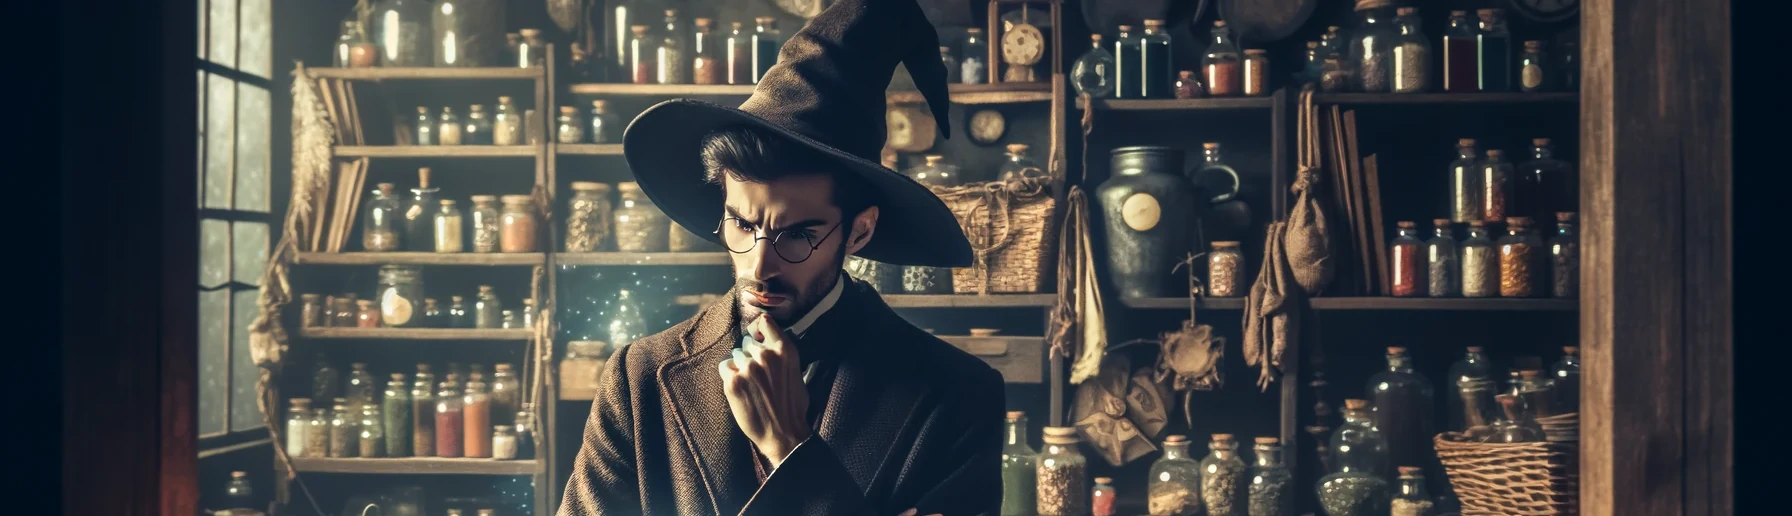 Wizard standing in his laboratory trying to find out what Magic spell he should use